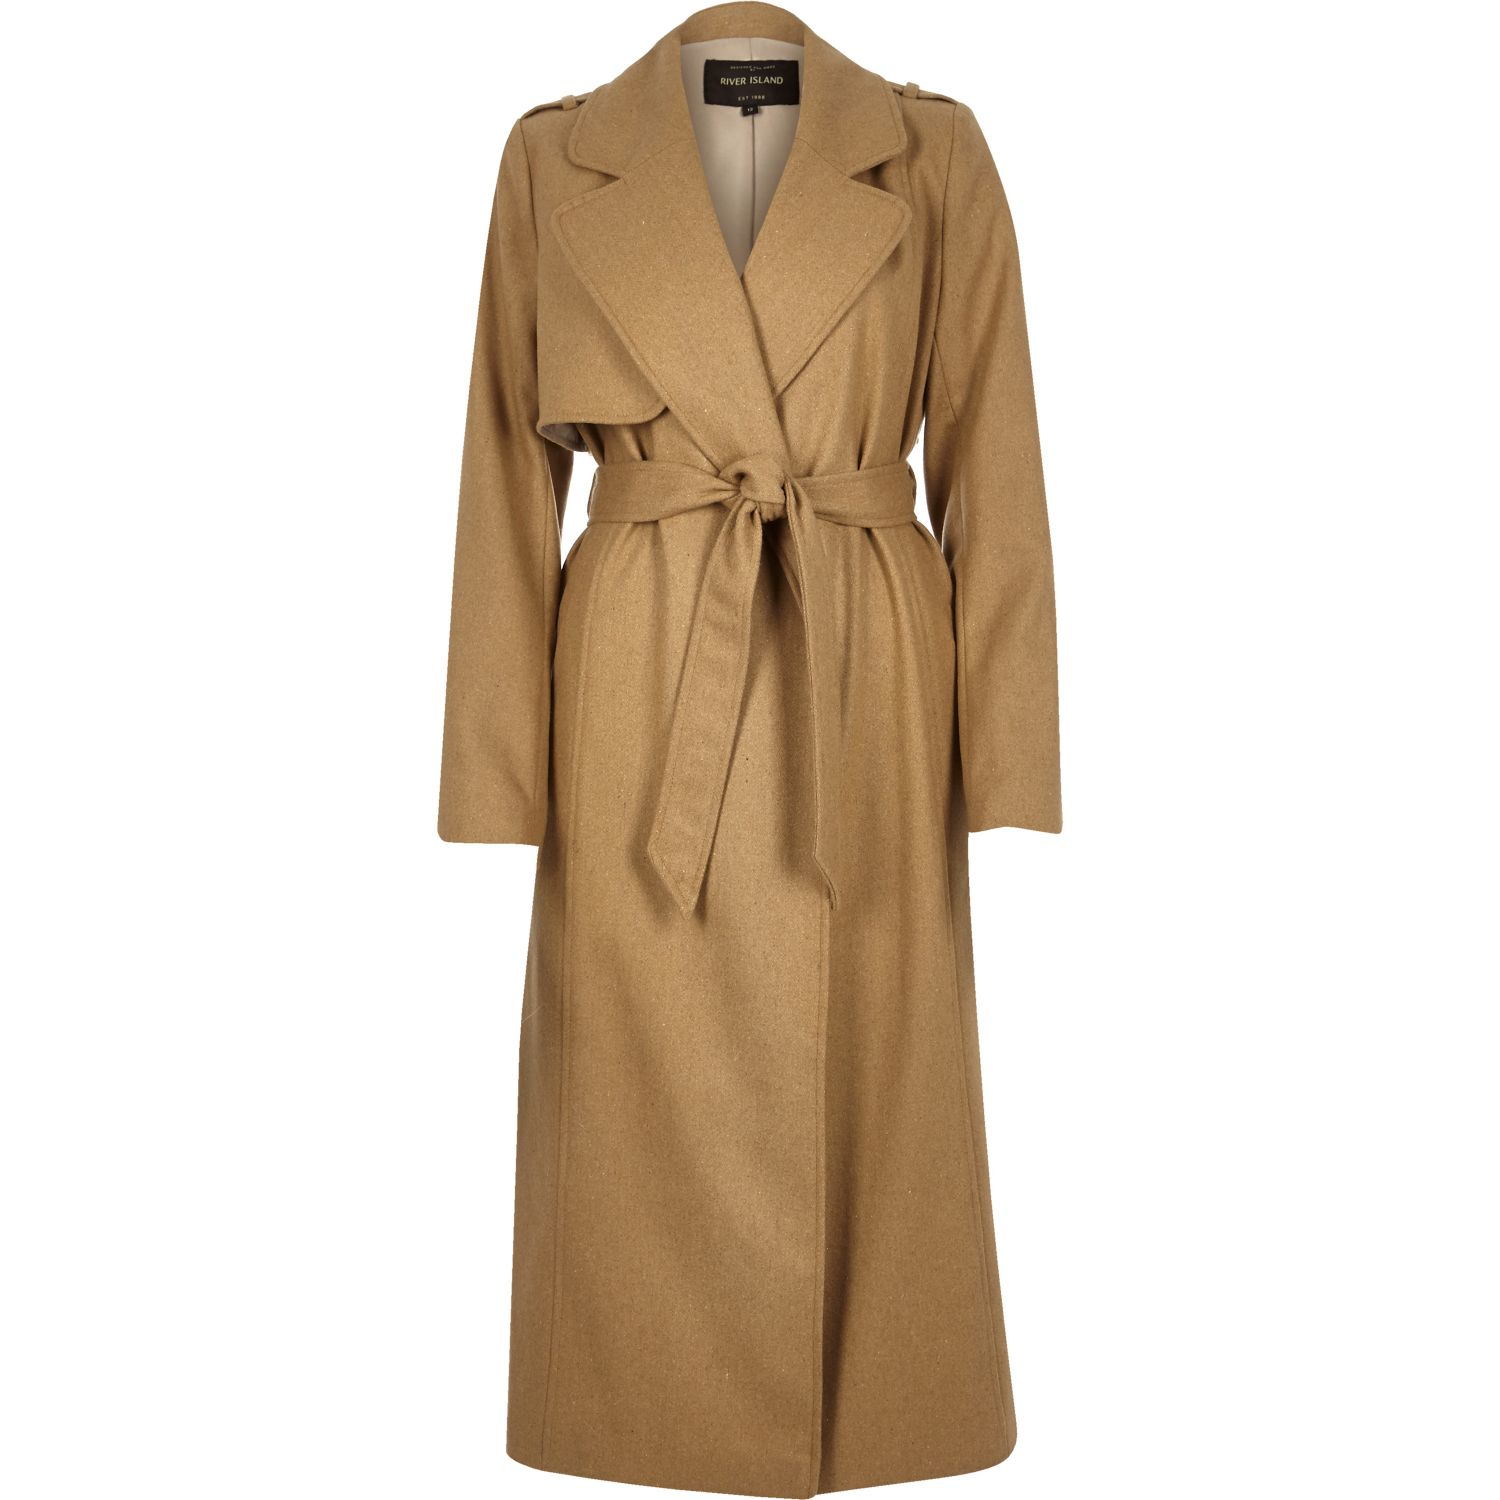 River Island Camel Wool-blend Longline Trench Coat in Natural - Lyst